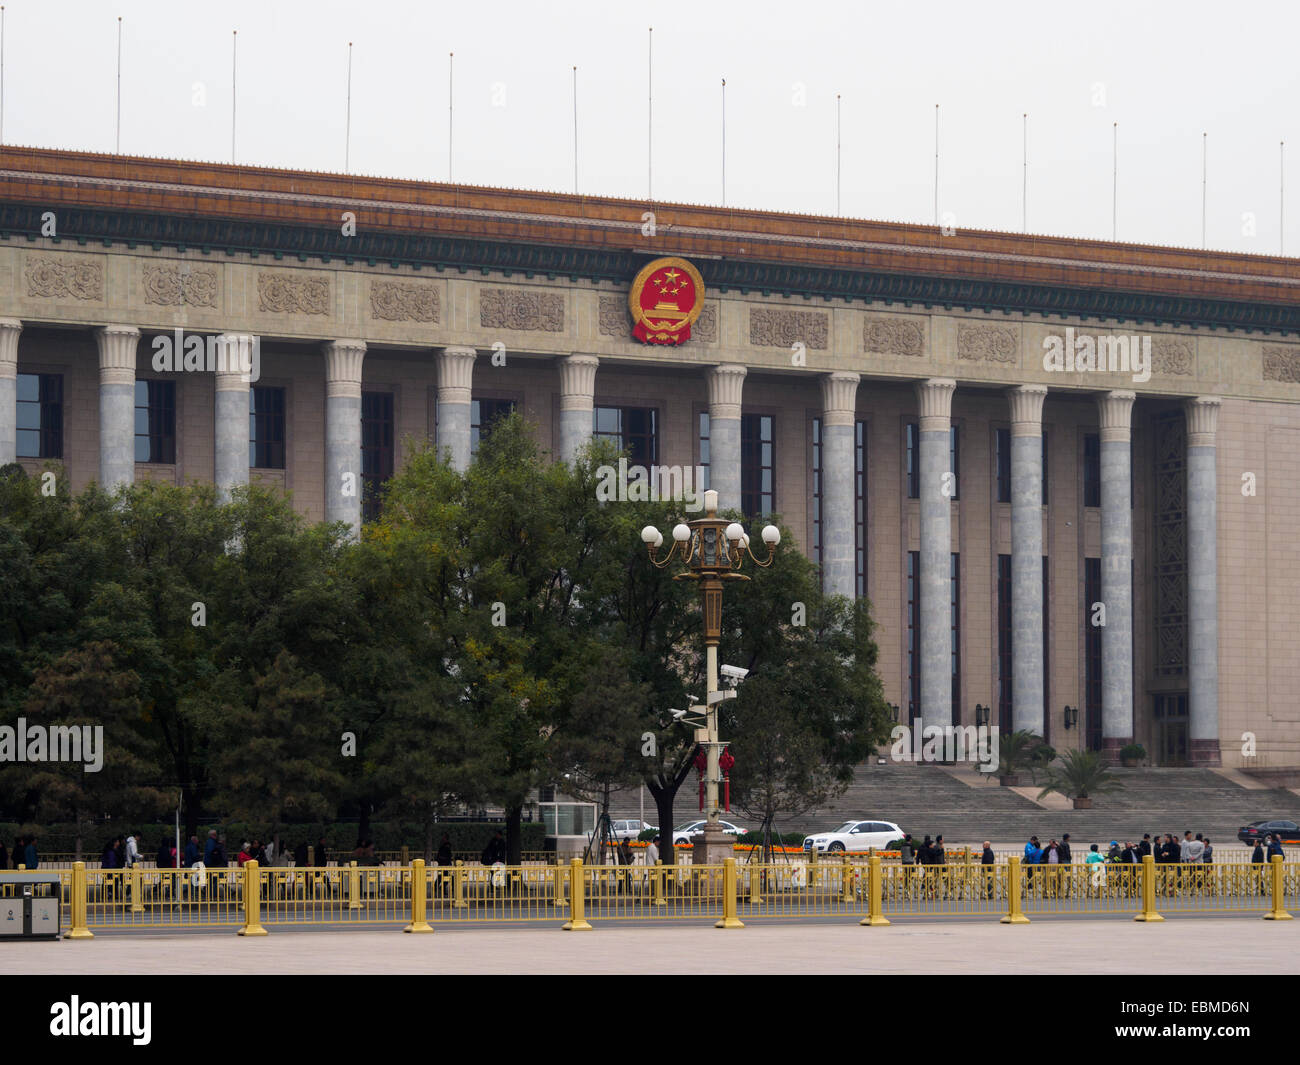 Great Hall of the People, Tiananmen Square, Beijing, China Stock Photo